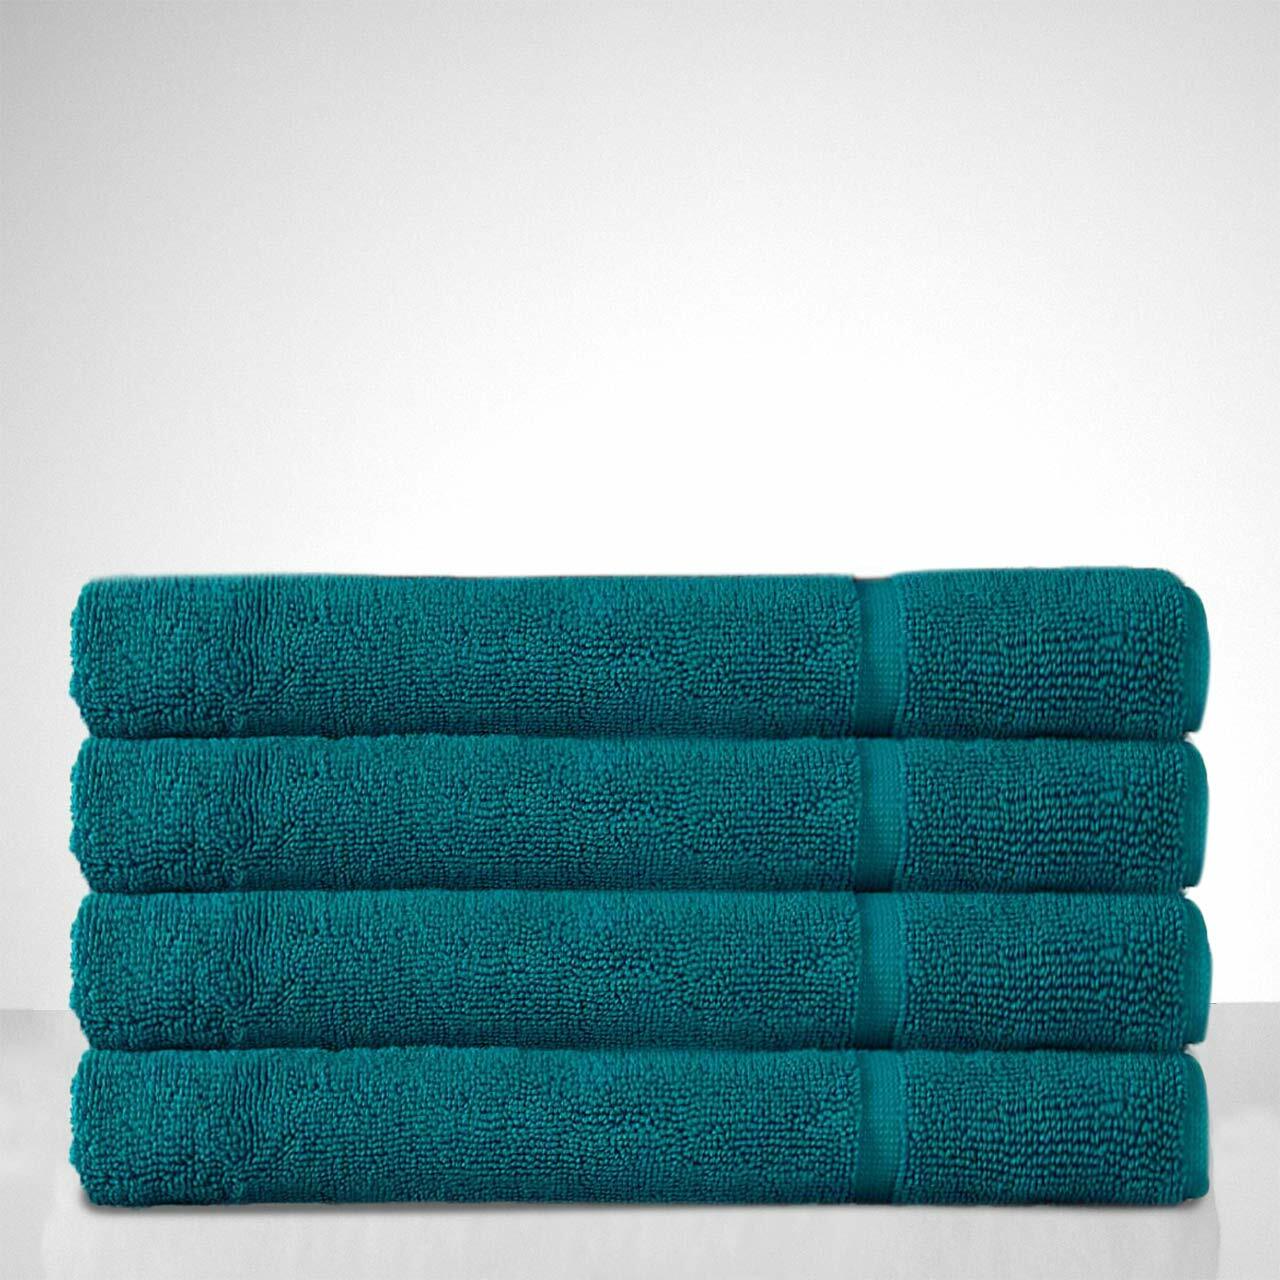 Extra 50% Off Royal Splendour 100% Cotton Bath Towel Collection with discount code